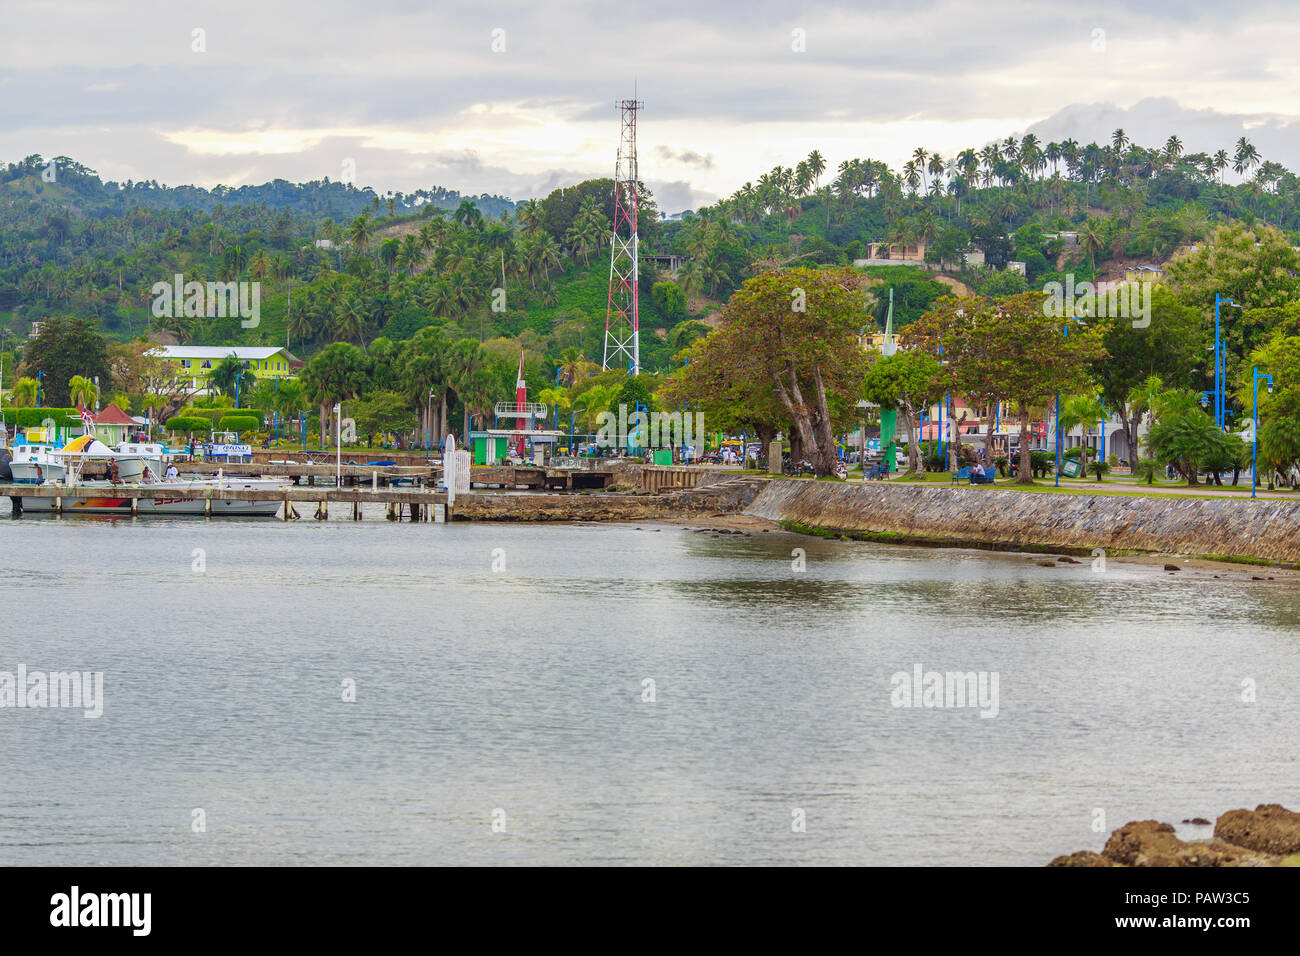 the view from the water on the embankment with green palm trees. Samana, Dominican Republic Stock Photo